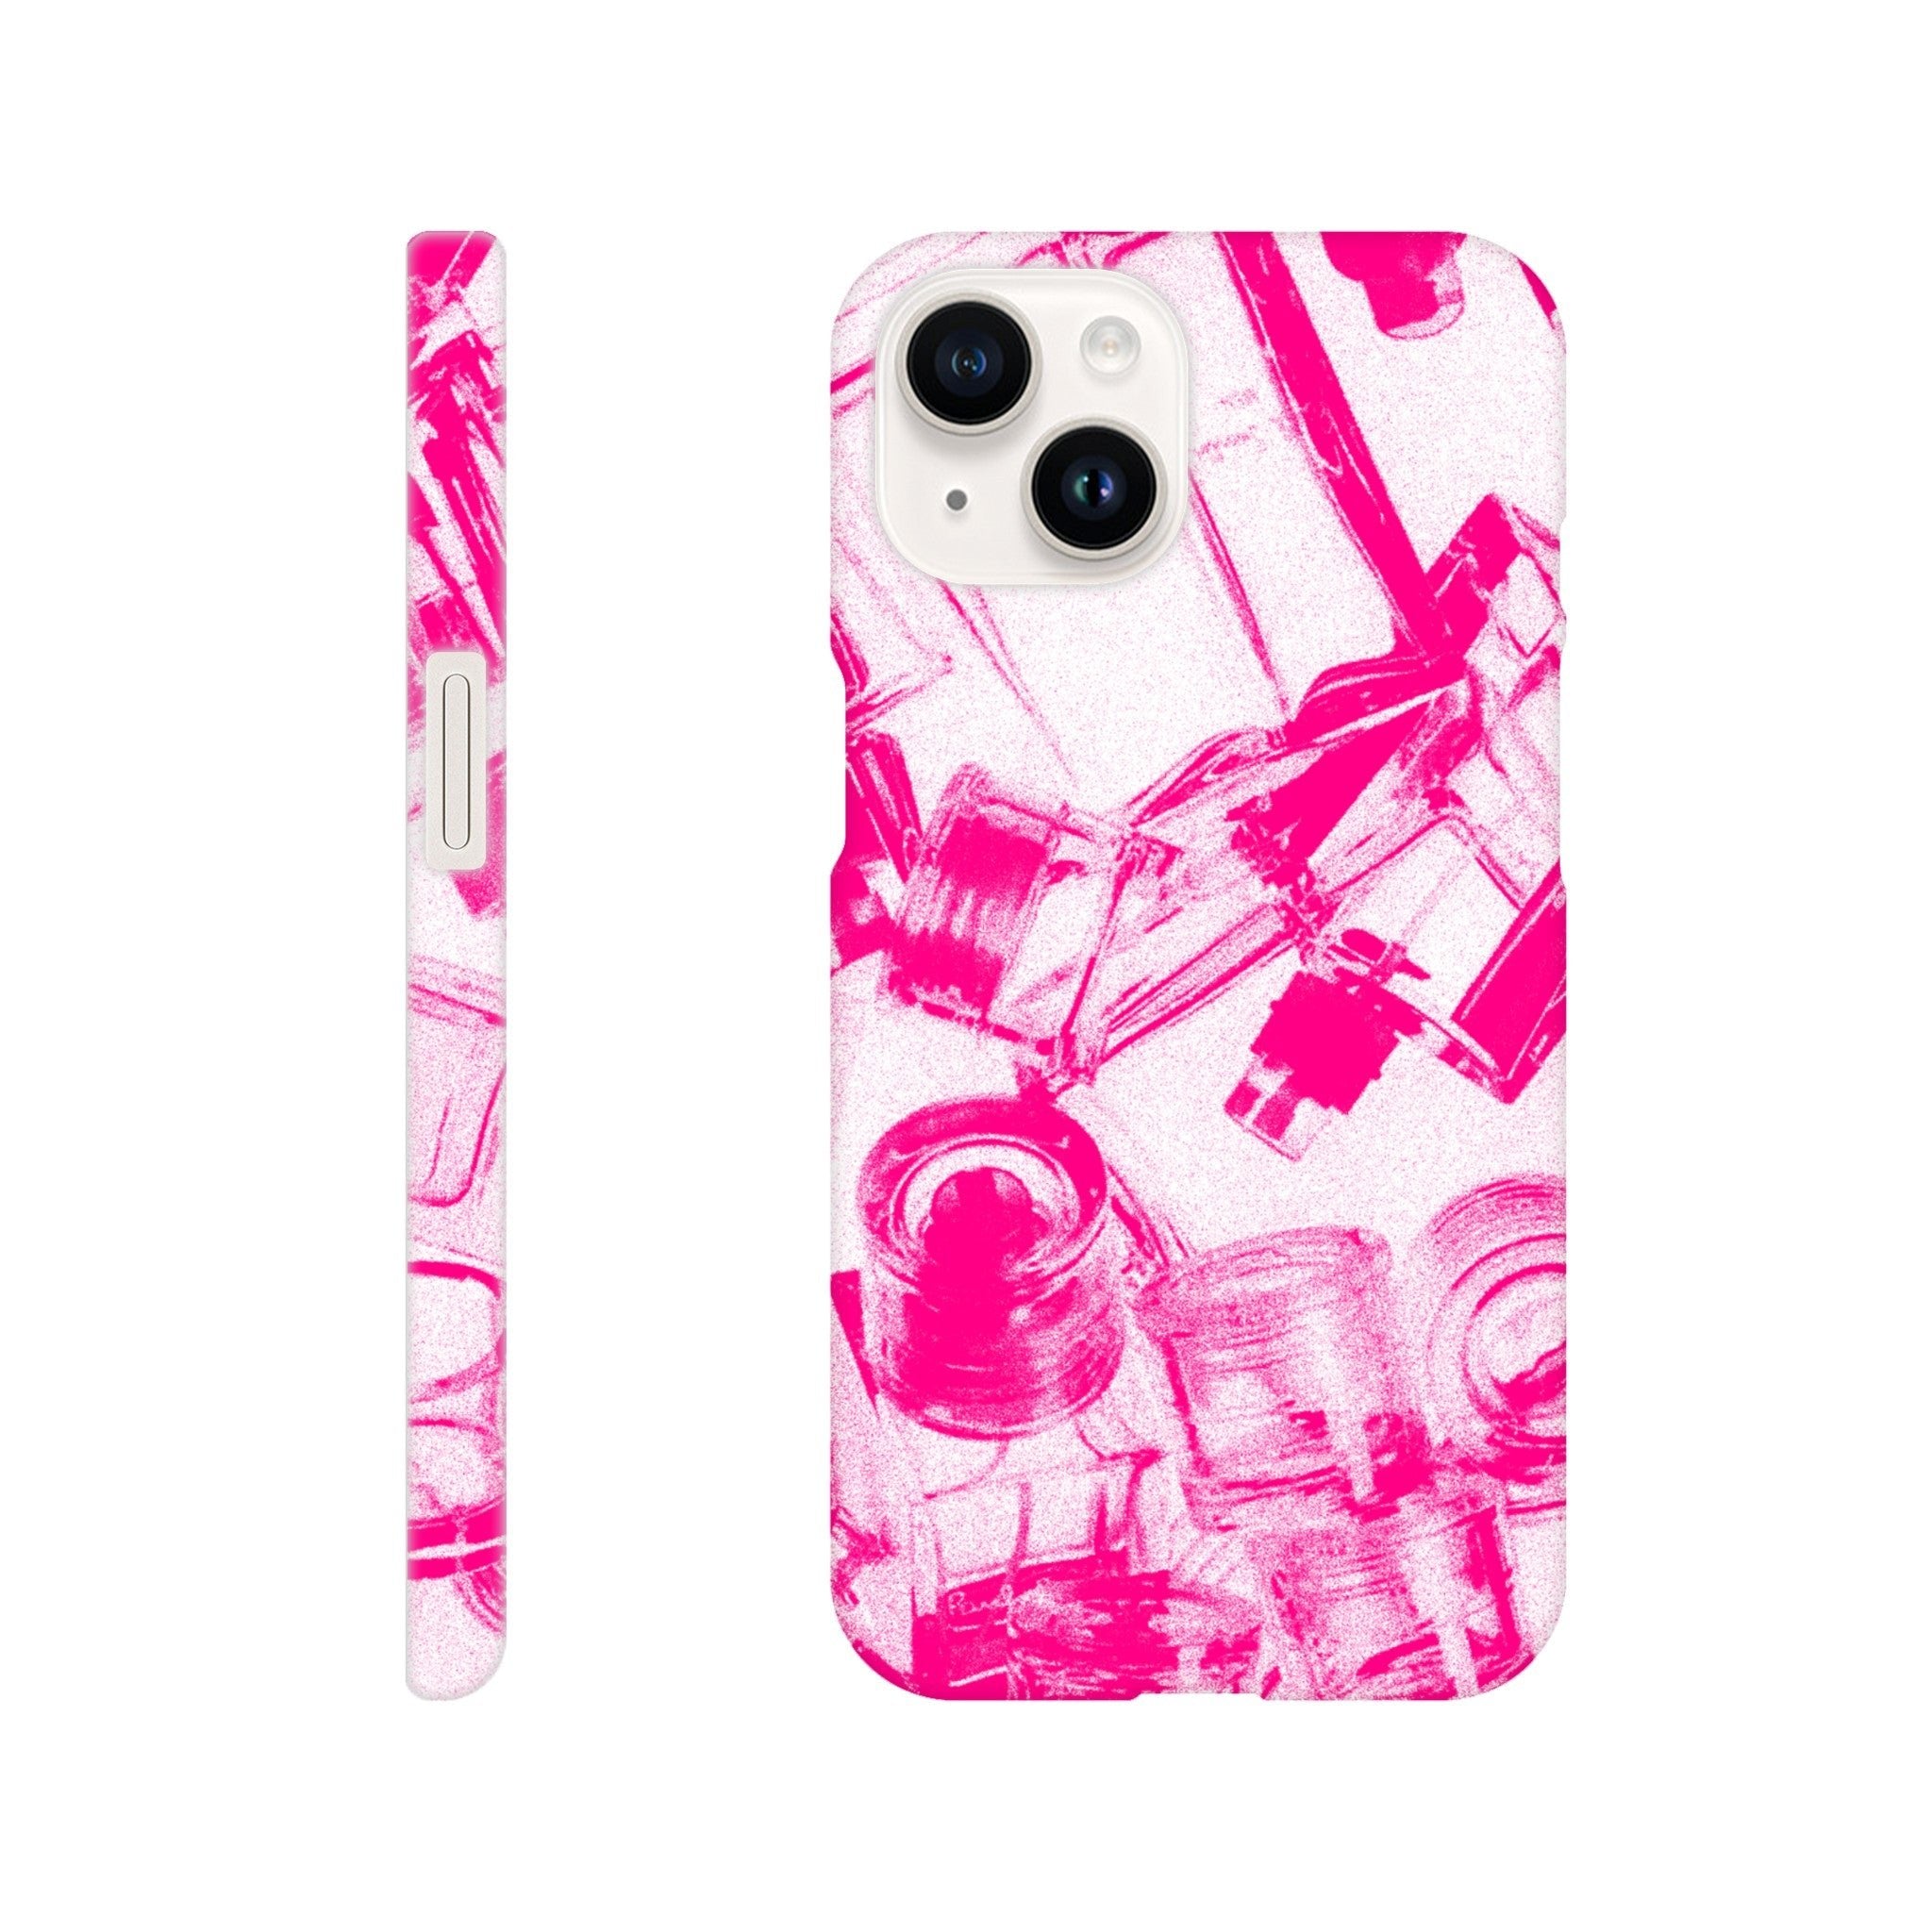 'Bottled Up' phone case - In Print We Trust